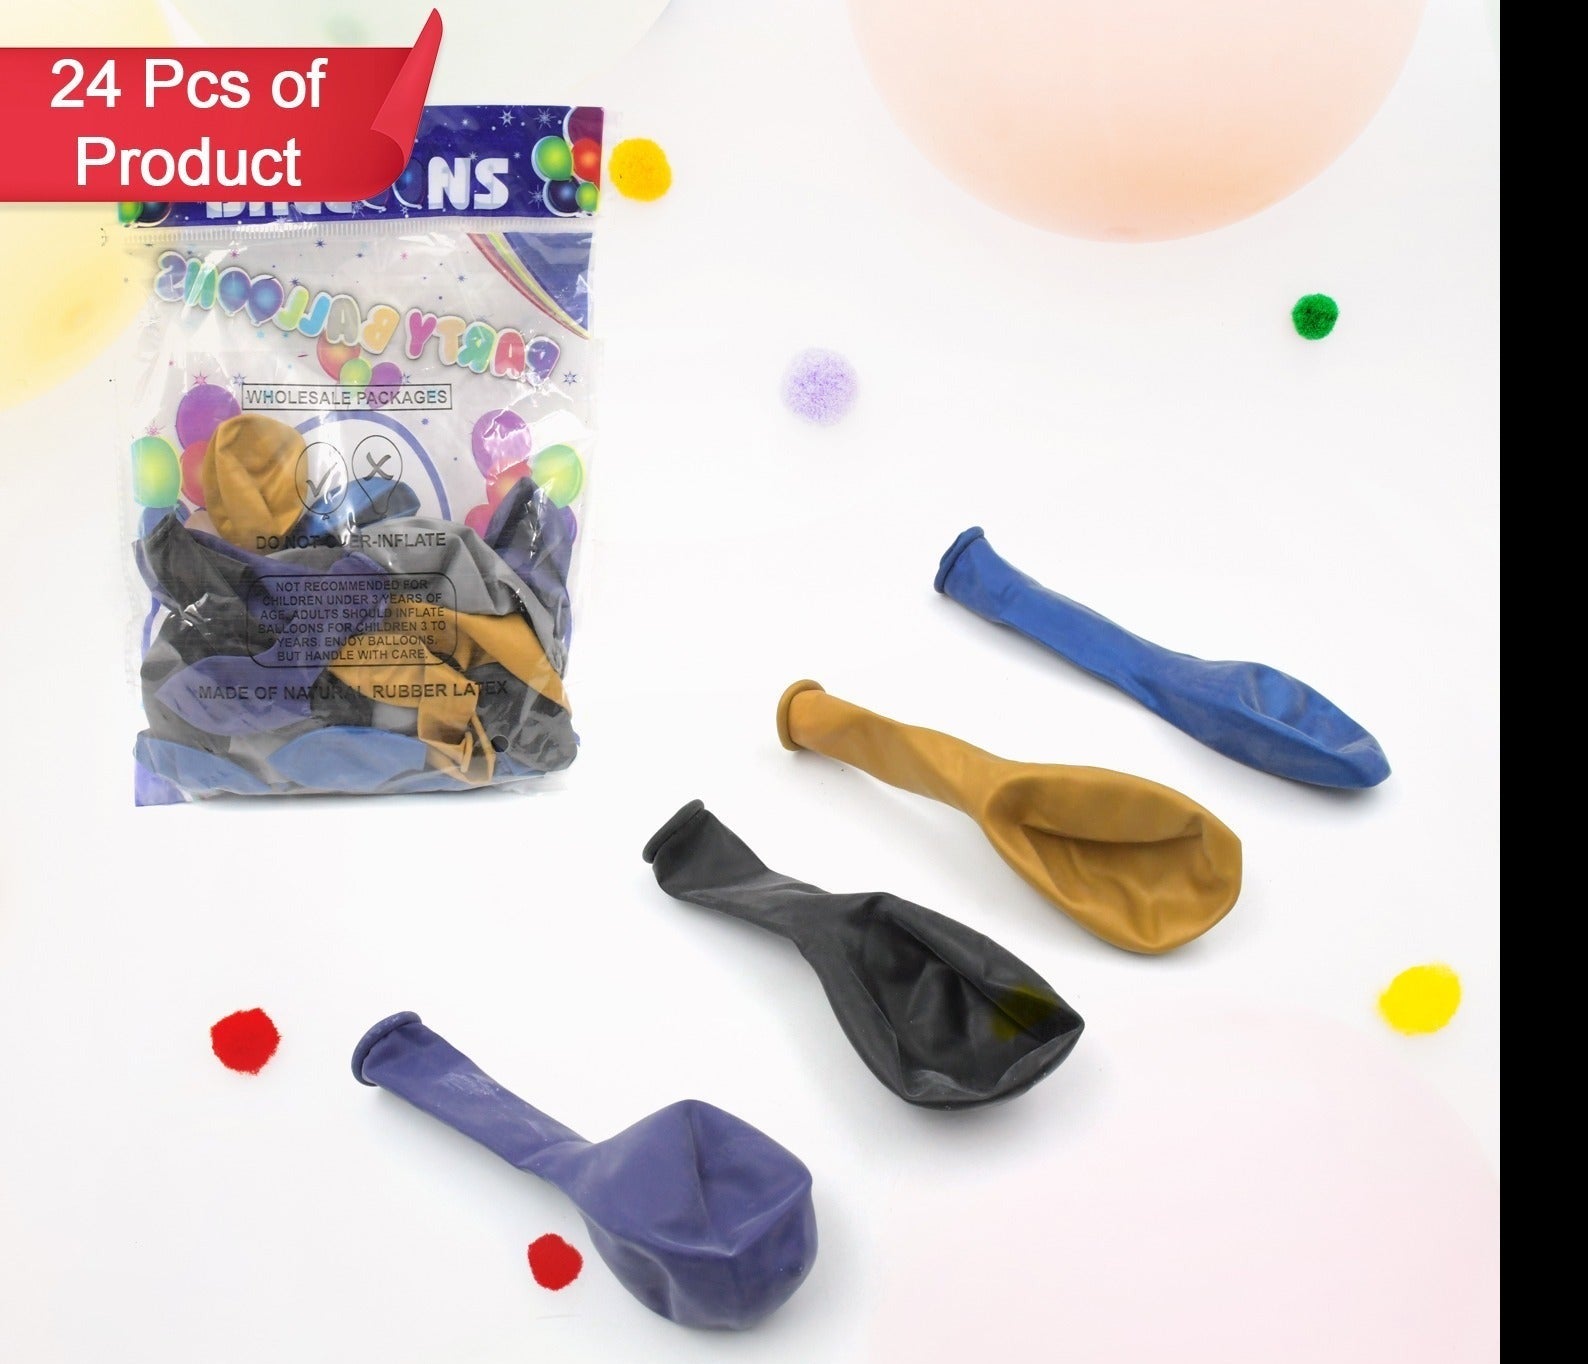 24-Pc Multicolor Latex Balloon Set for Various Celebrations – Perfect for Kids' Birthdays and More!